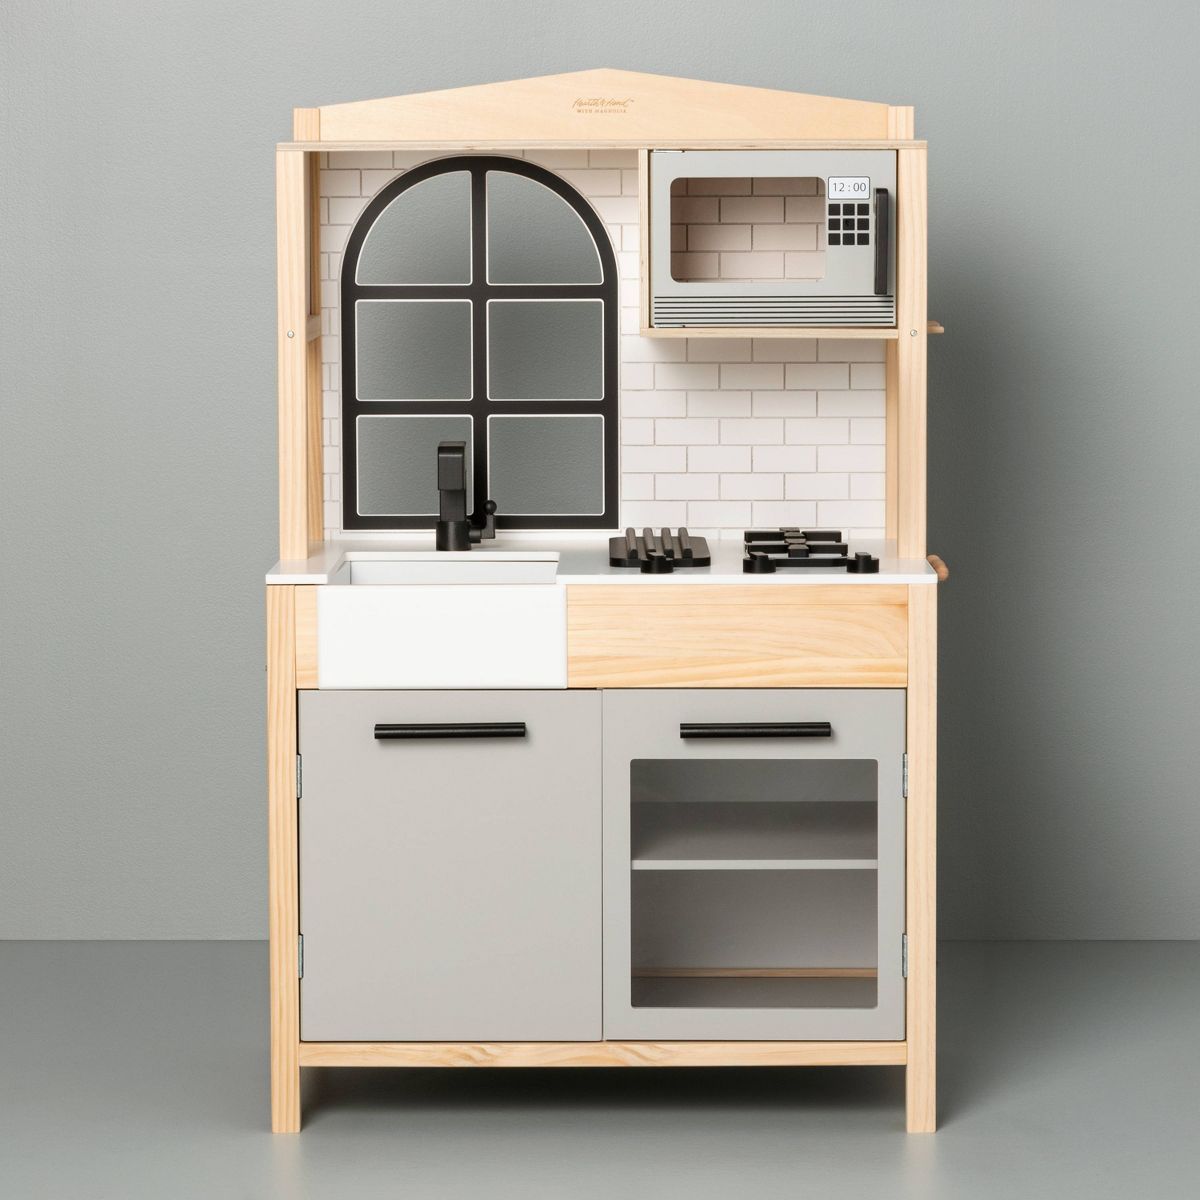 Wooden Toy Kitchen - Hearth & Hand™ with Magnolia | Target